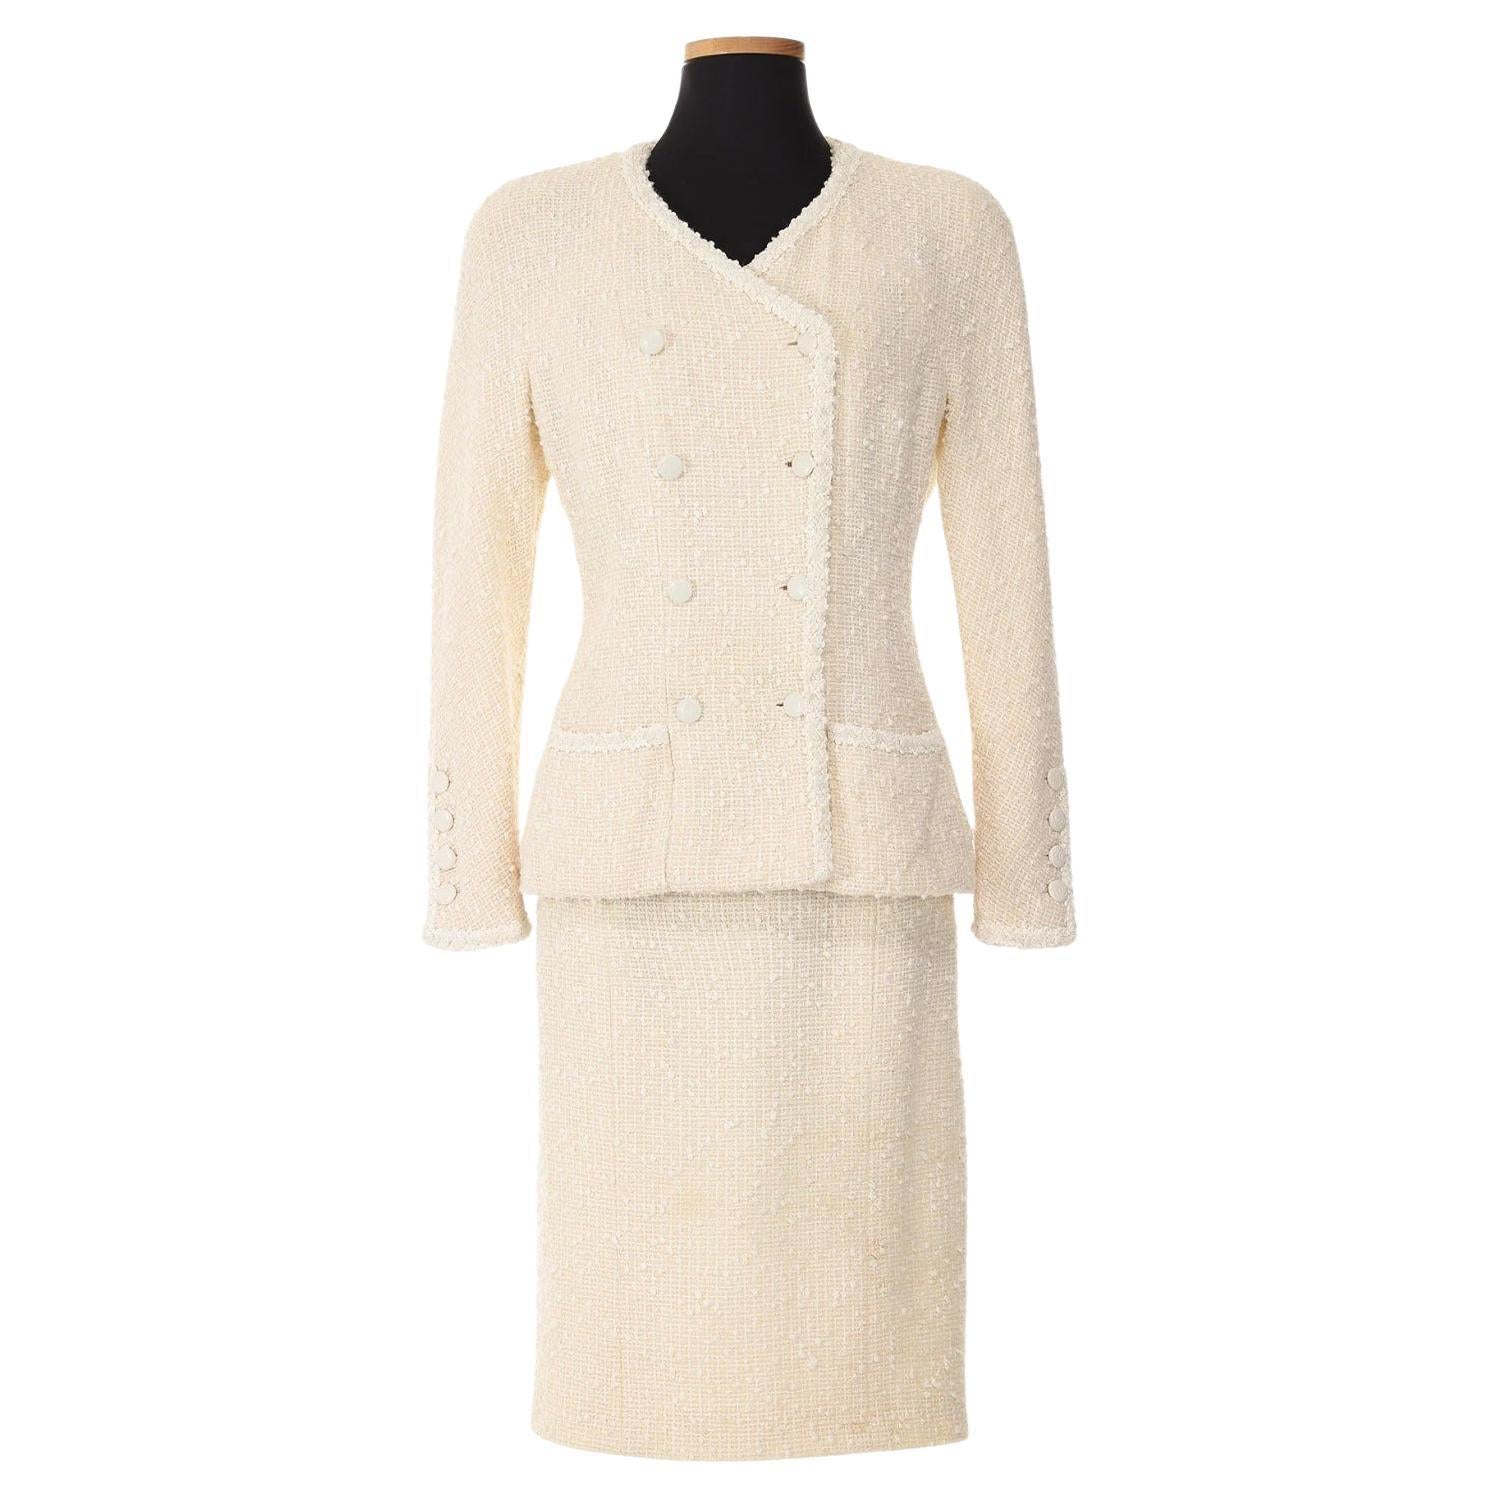 Chanel Cruise 1996 White Tweed Skirt Suit For Sale